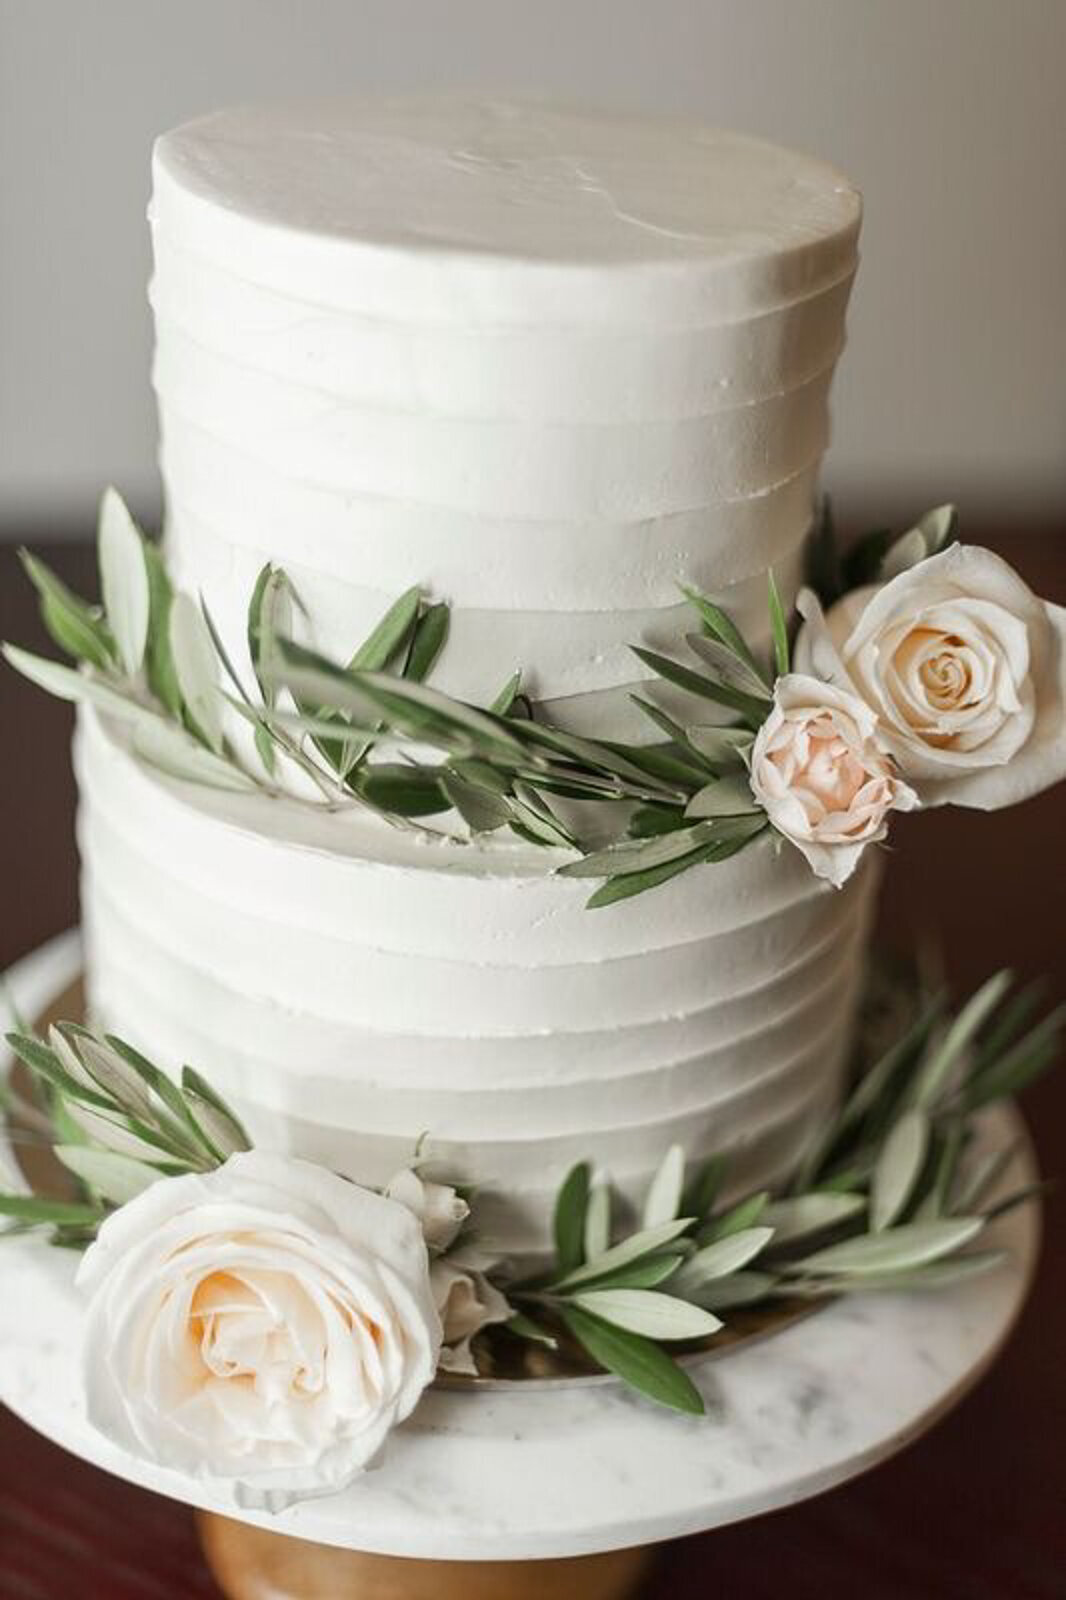 Classic 2 tiered white wedding cake with striped buttercream, topped with roses and greenery, by Lemonberry Pastries, contemporary cakes & desserts in Calgary, Alberta, featured on the Brontë Bride Vendor Guide.